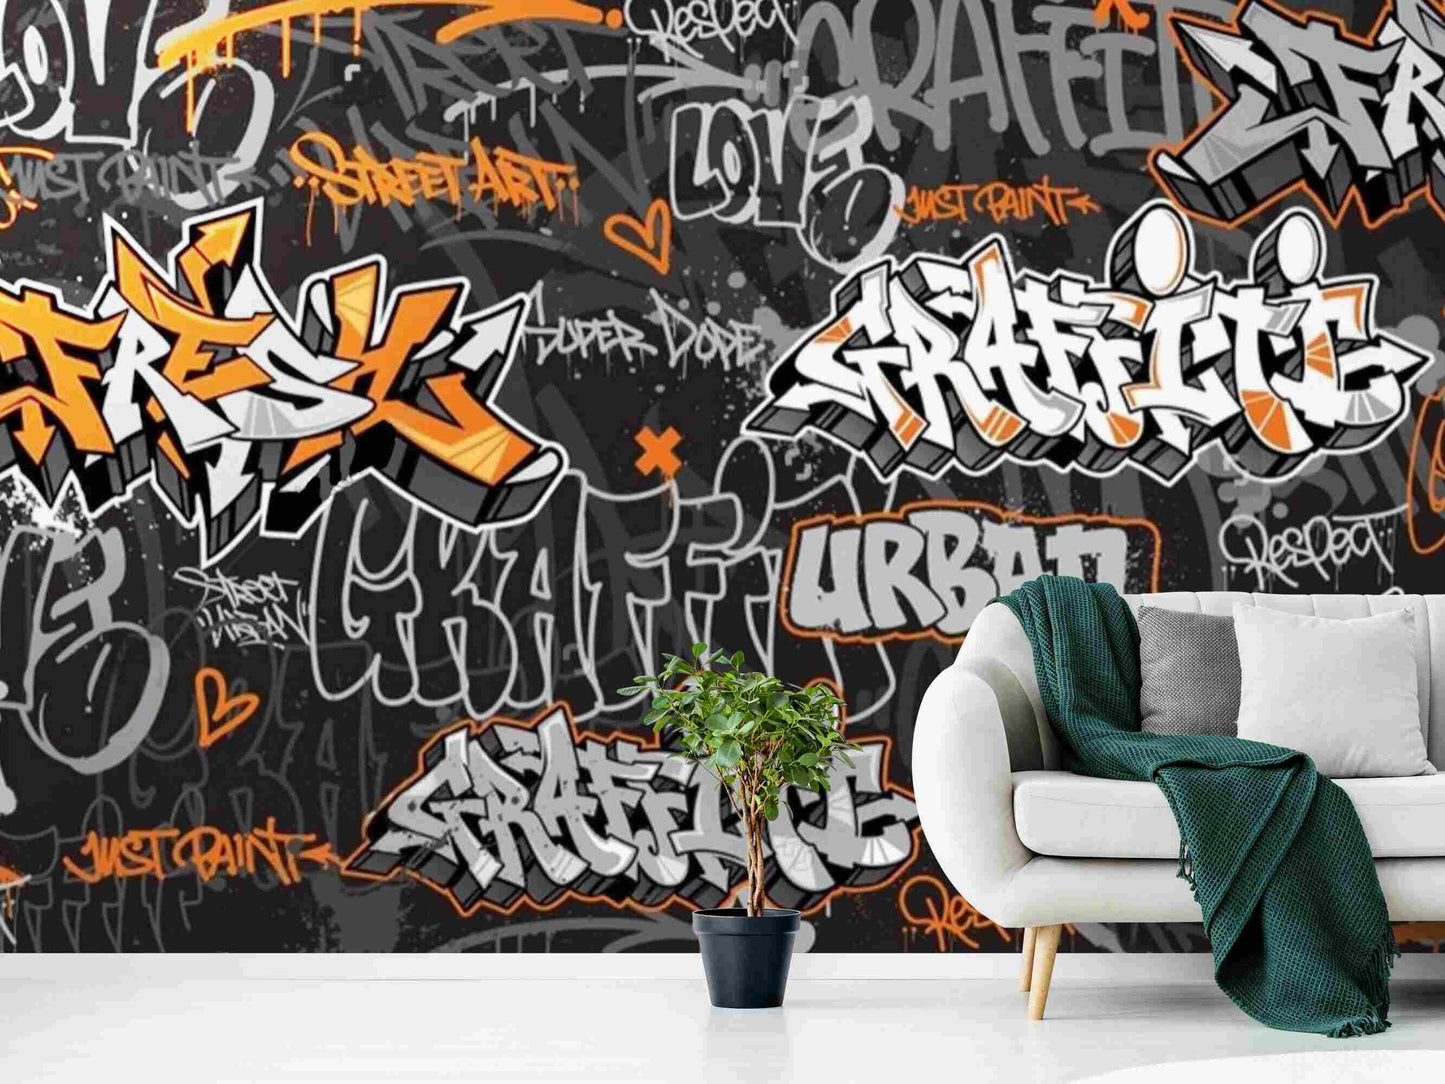  A photo of a wall covered in hip-hop graffiti wallpaper, featuring various colorful and intricate designs and symbols associated with hip-hop culture. The wall design creates a bold and visually striking display, with its mix of bold typography, intricate patterns, and graffiti-style illustrations. The overall effect is a vibrant and dynamic representation of the energy and creativity of hip-hop culture.